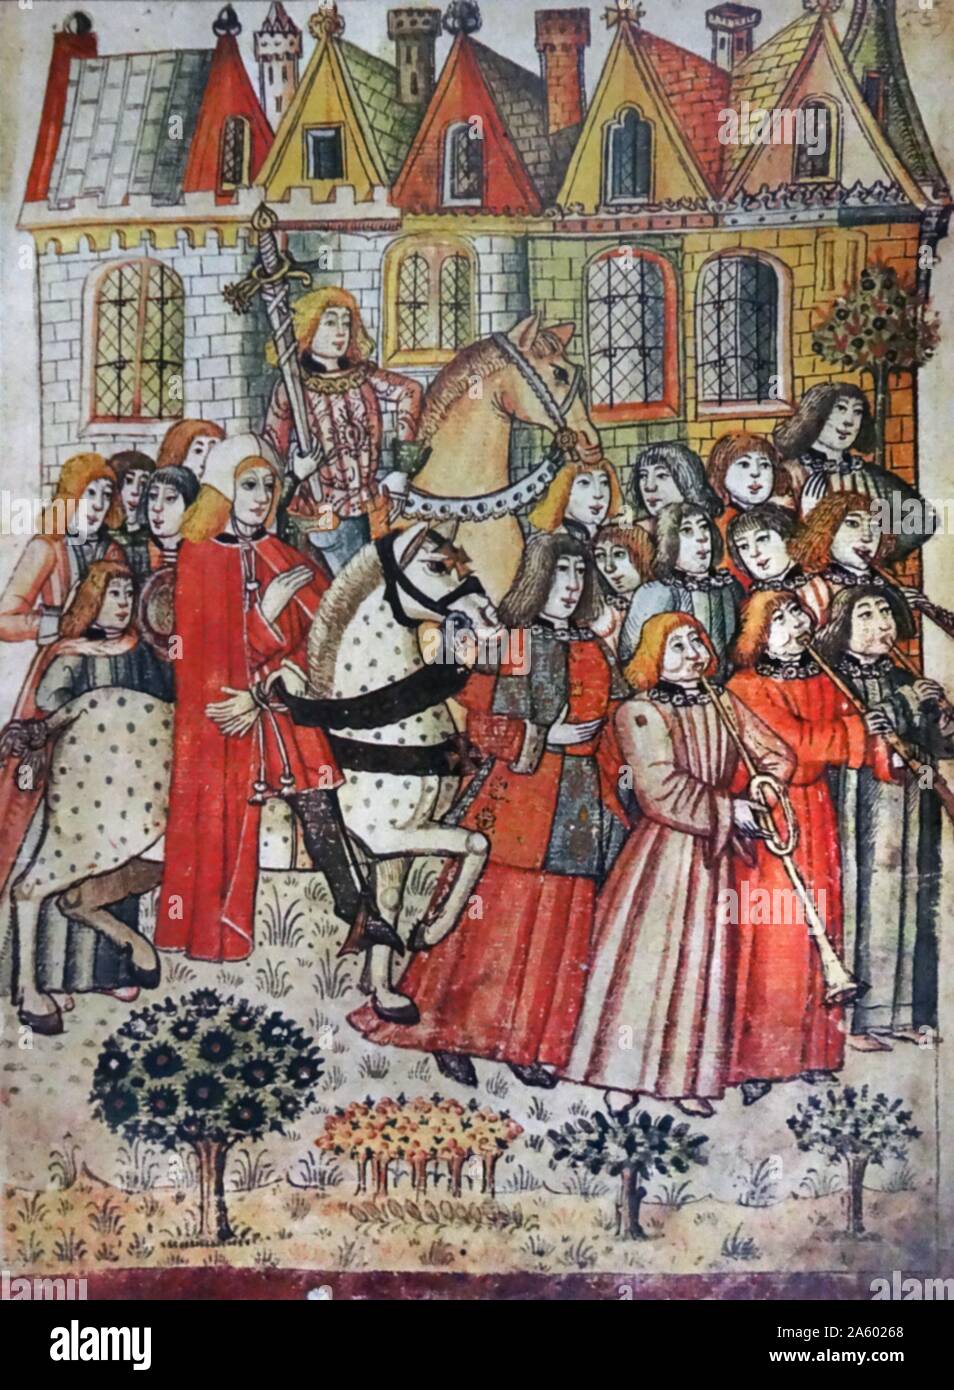 Miniature showing a new knight of the Bath riding through the courtyard of the Tower of London to the royal lodgings in order to present himself to the King. He is accompanied by heralds, trumpeters and his squire carrying his sword and spurs. Illustration from Writhe's Garter Book, 1490. Stock Photo